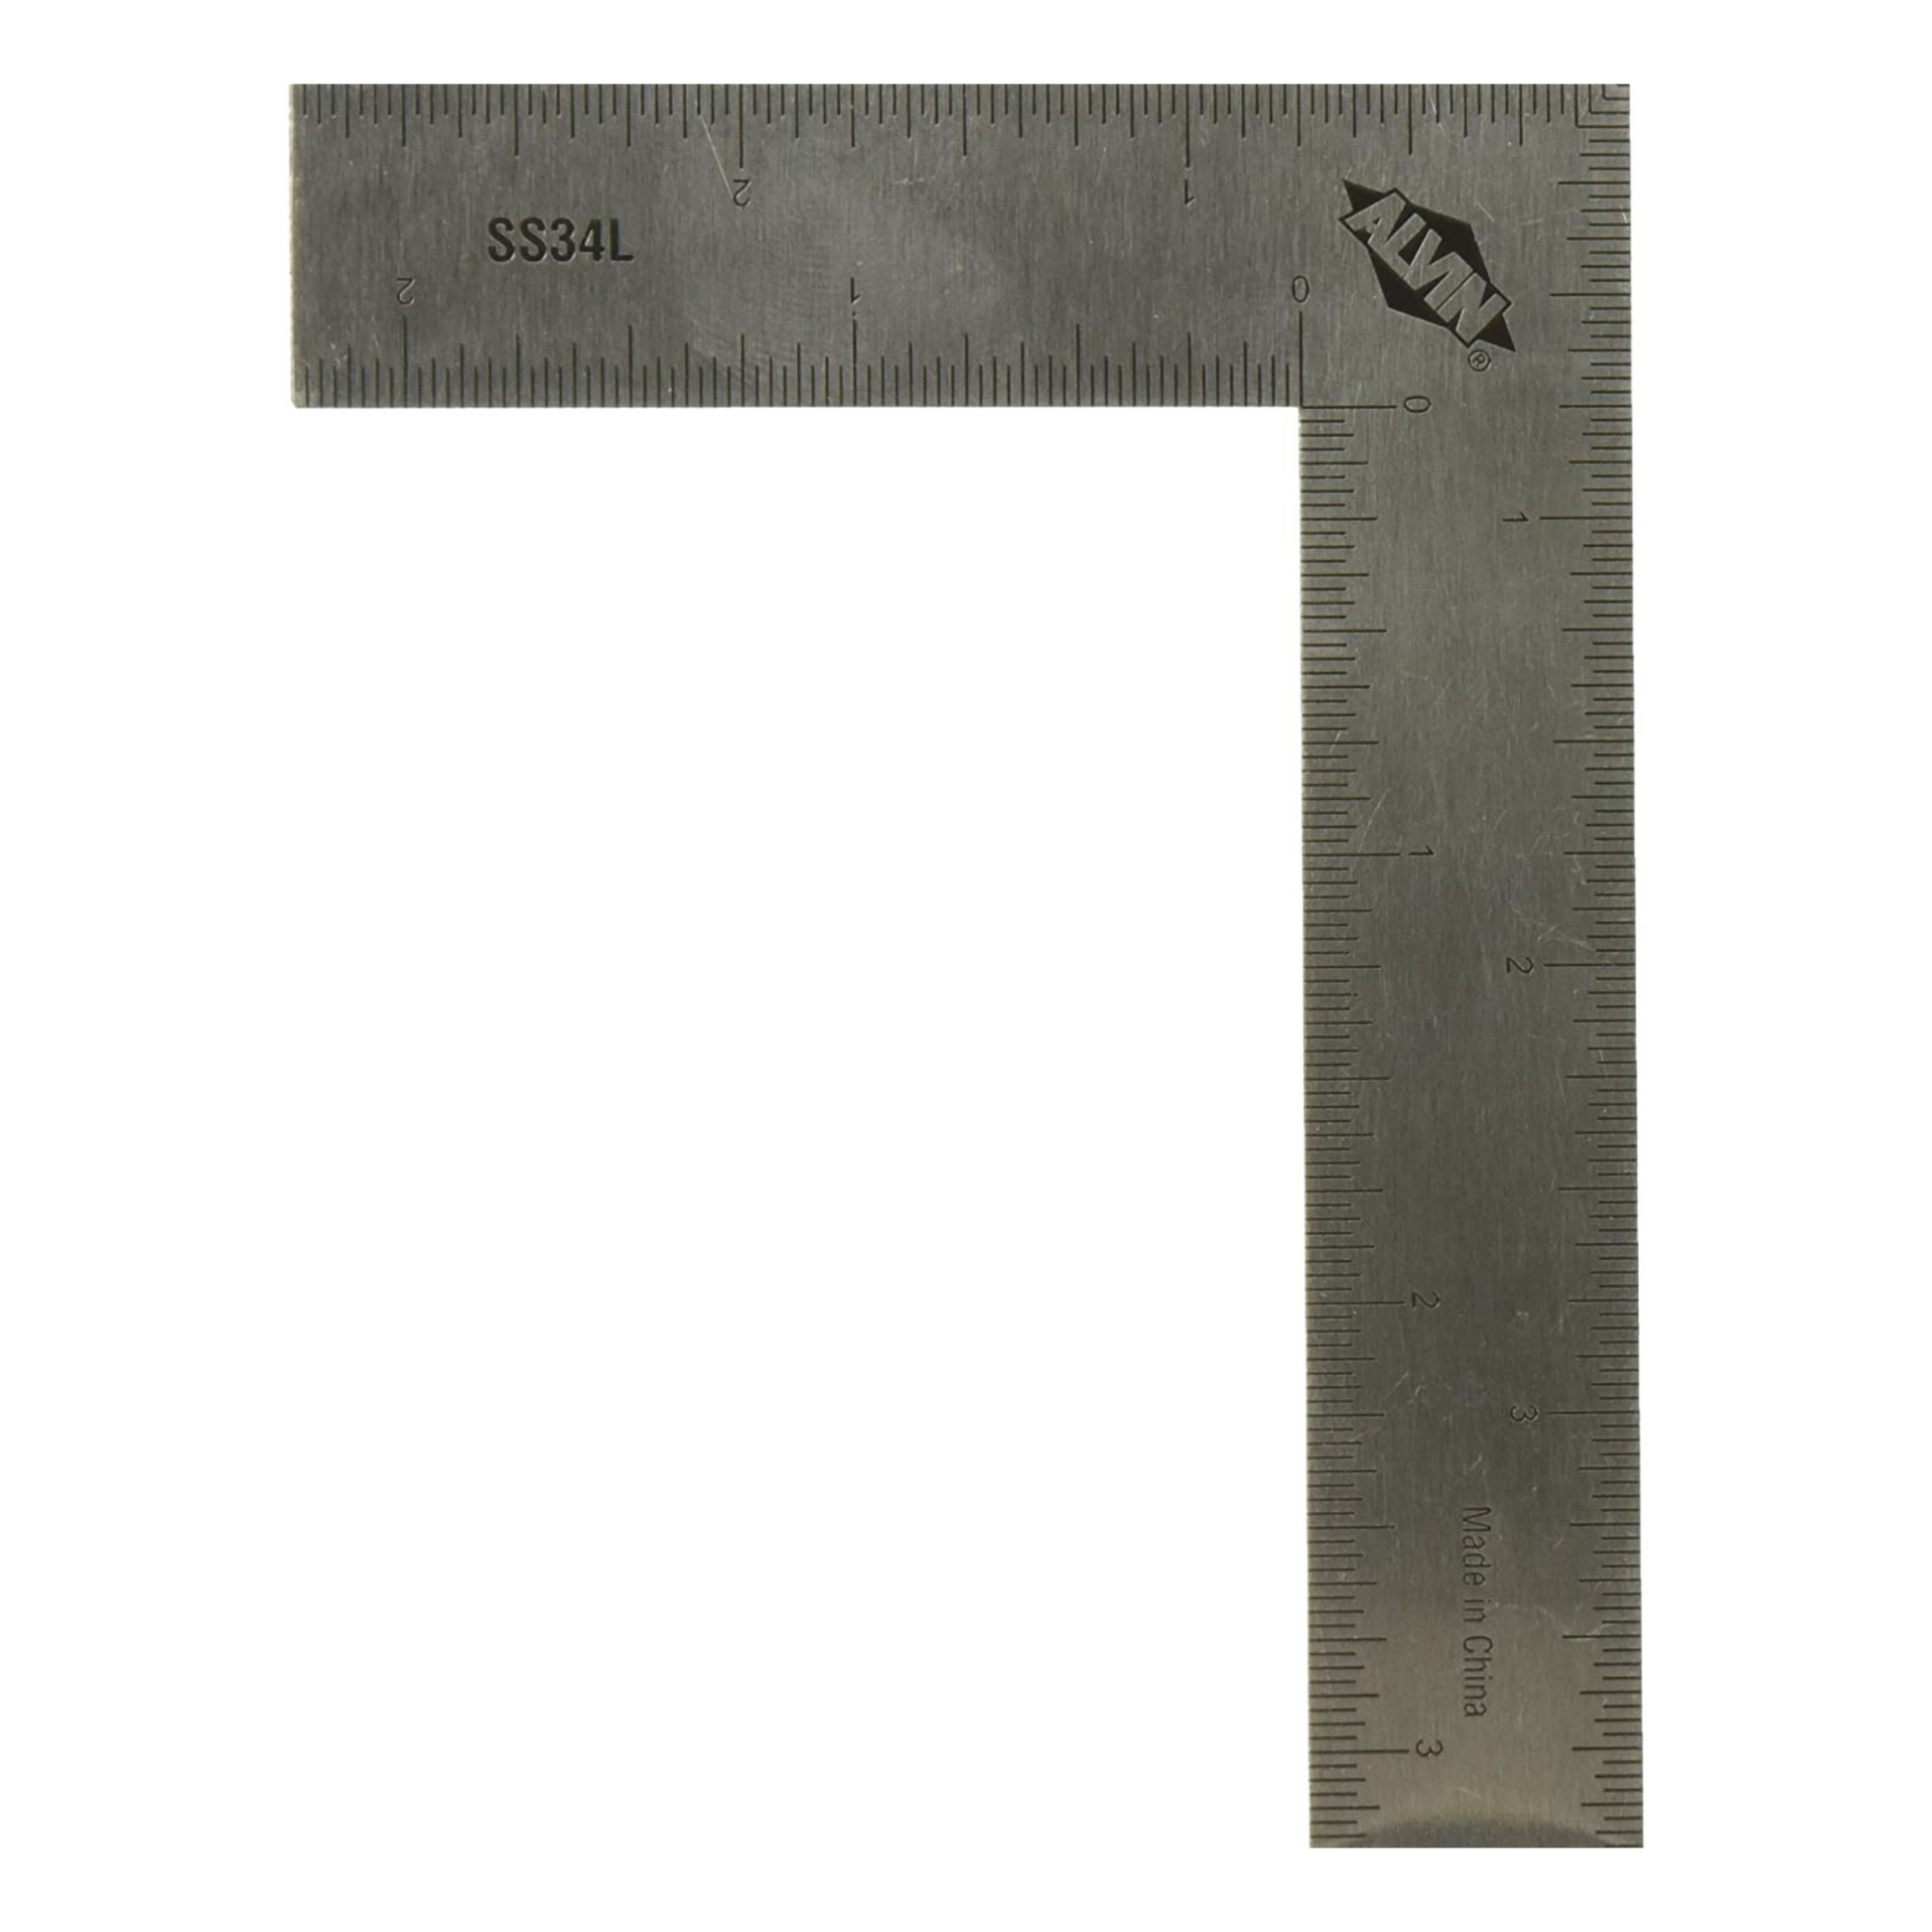 ALVIN SKU: SS34L  Alvin, L-Square Stainless Steel Ruler, Ideal Drafting Tool - 3 x 4 Inches